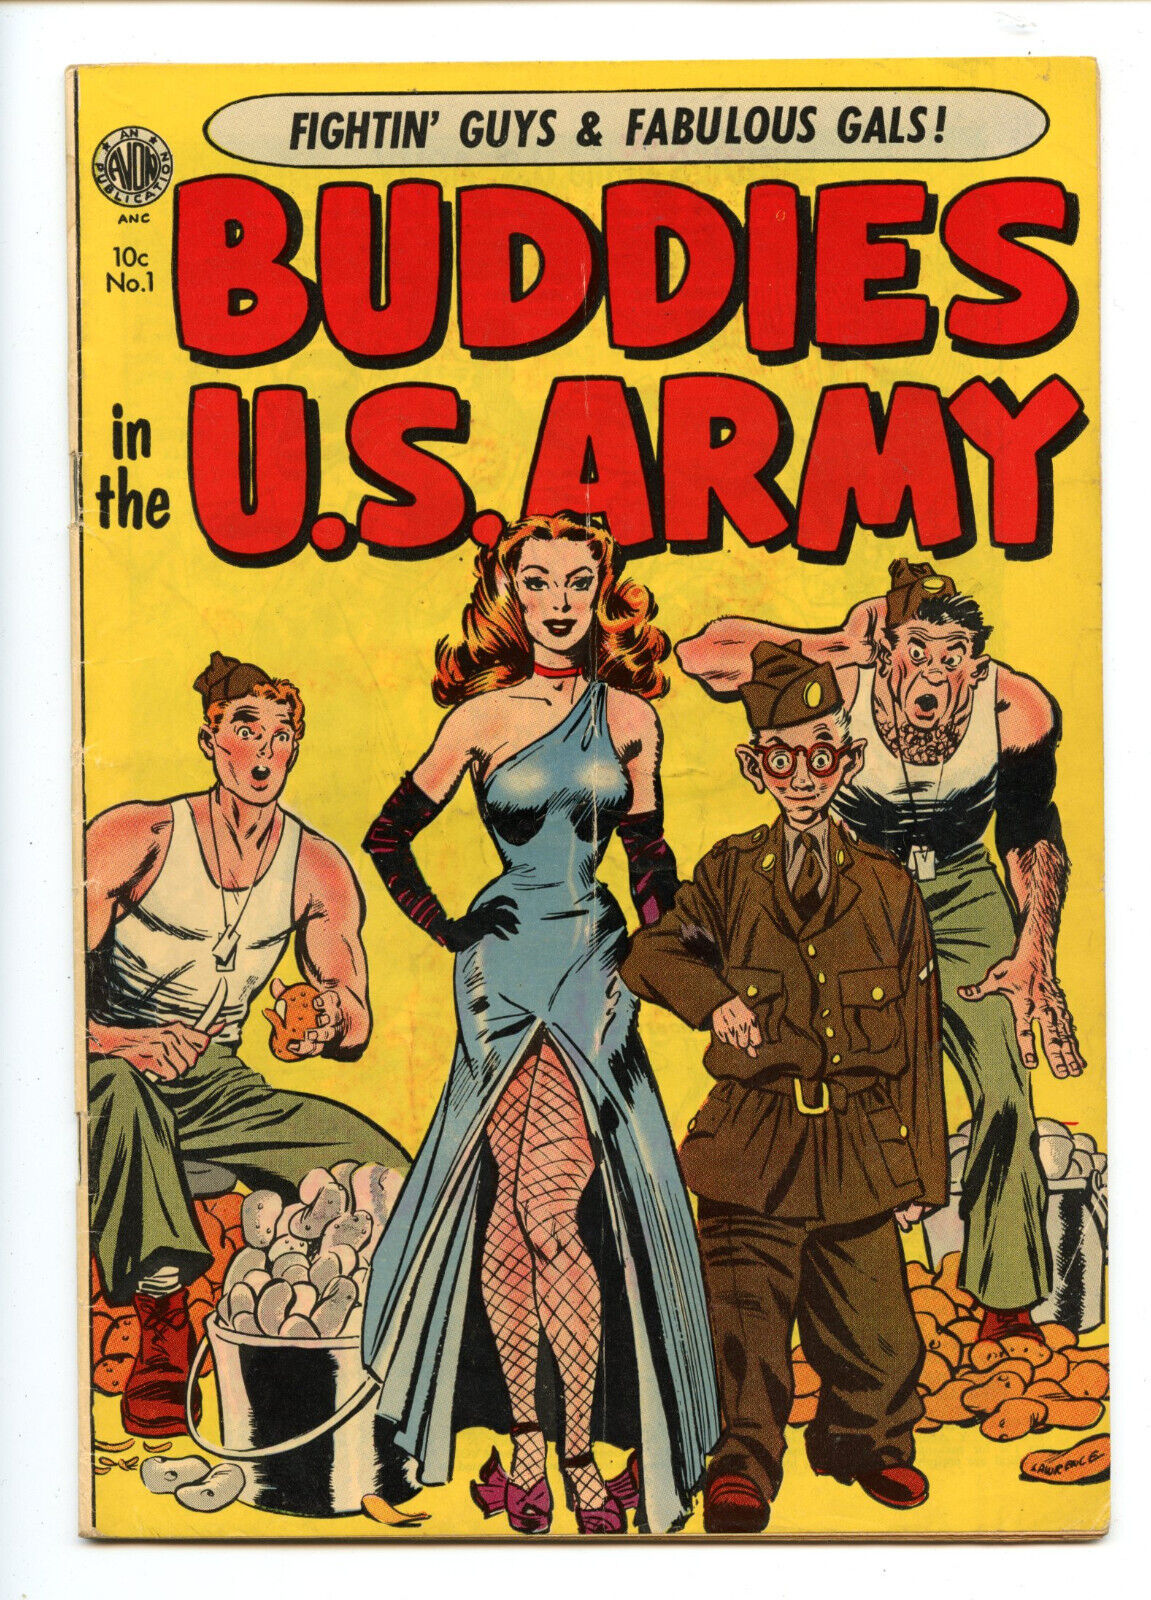 Buddies in the U.S. Army 1 golden age #1 GGA fabulous gals yes, best one on ebay